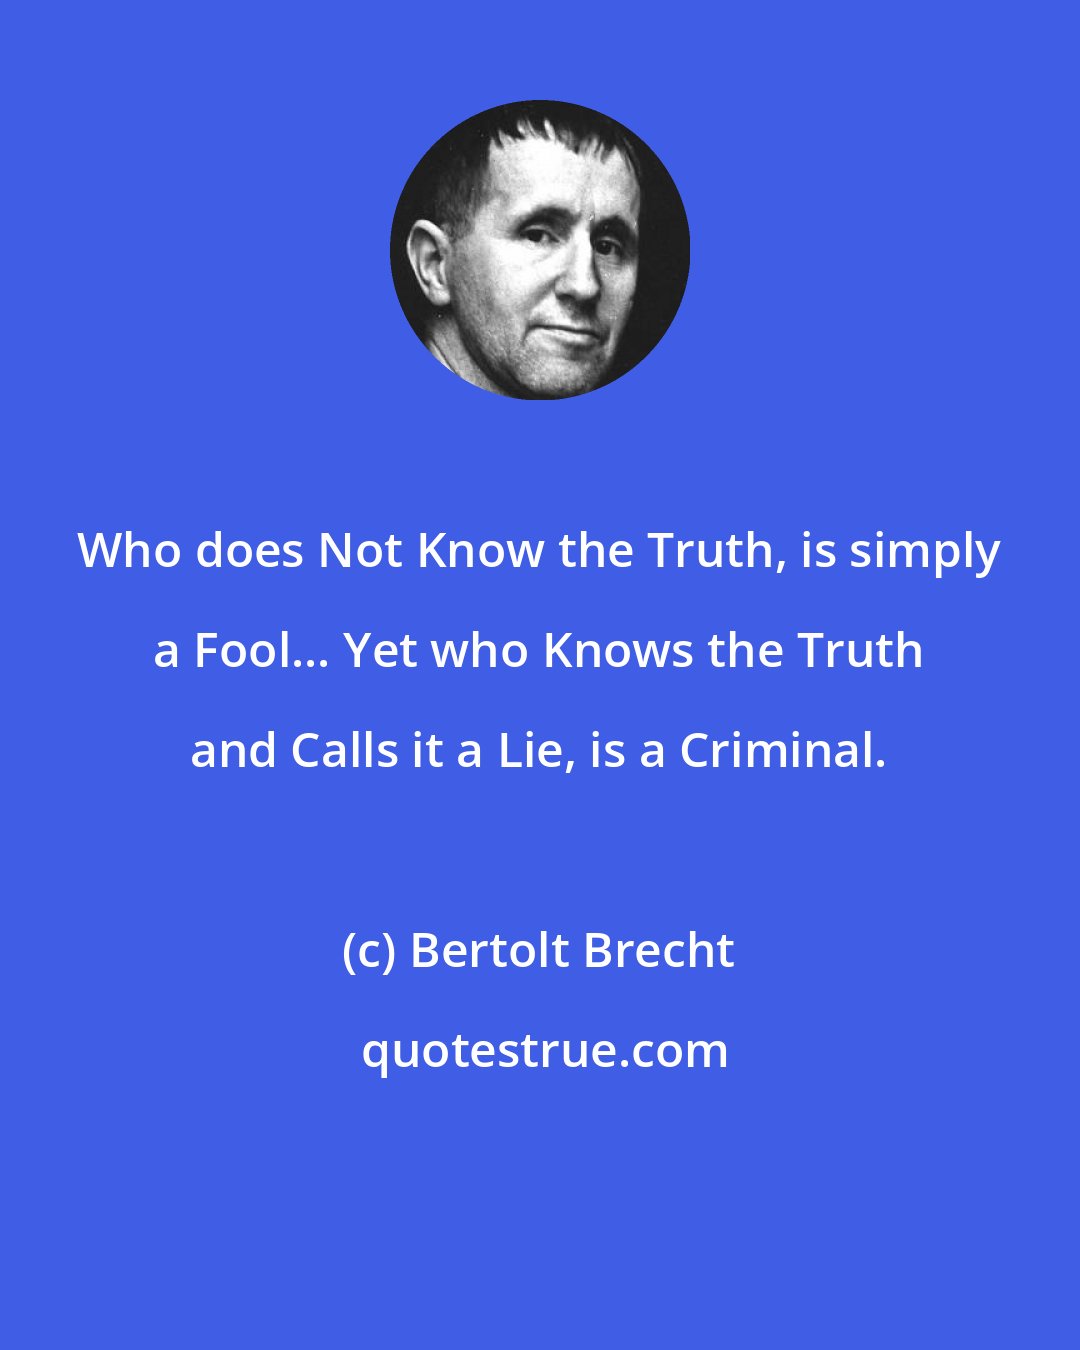 Bertolt Brecht: Who does Not Know the Truth, is simply a Fool... Yet who Knows the Truth and Calls it a Lie, is a Criminal.